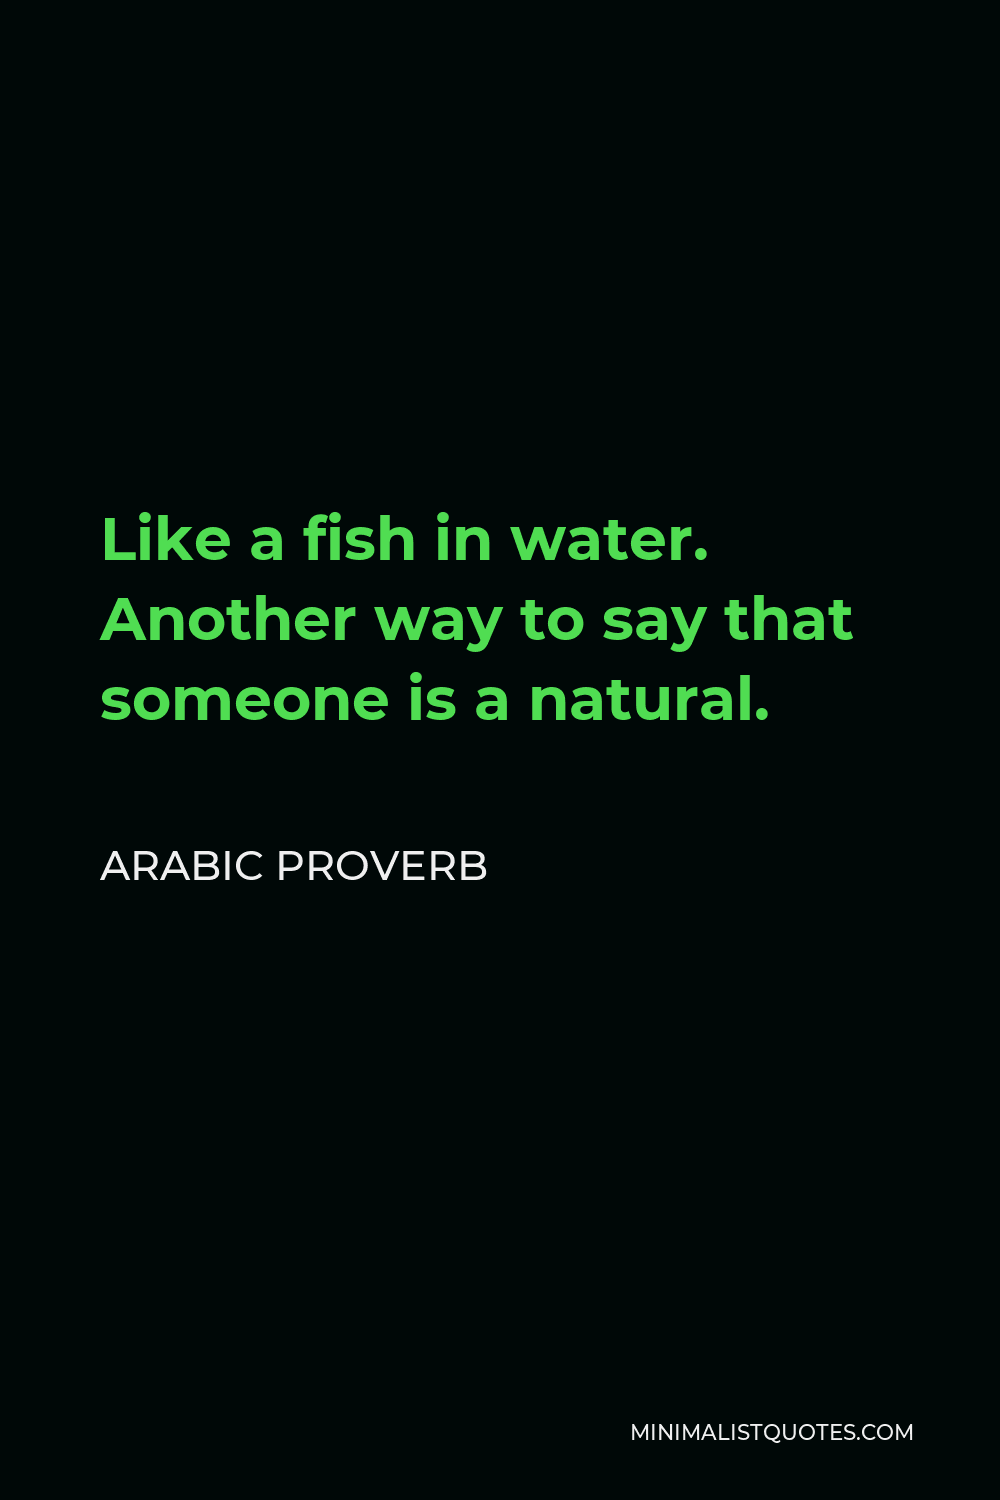 Arabic Proverb Quote - Like a fish in water. Another way to say that someone is a natural.